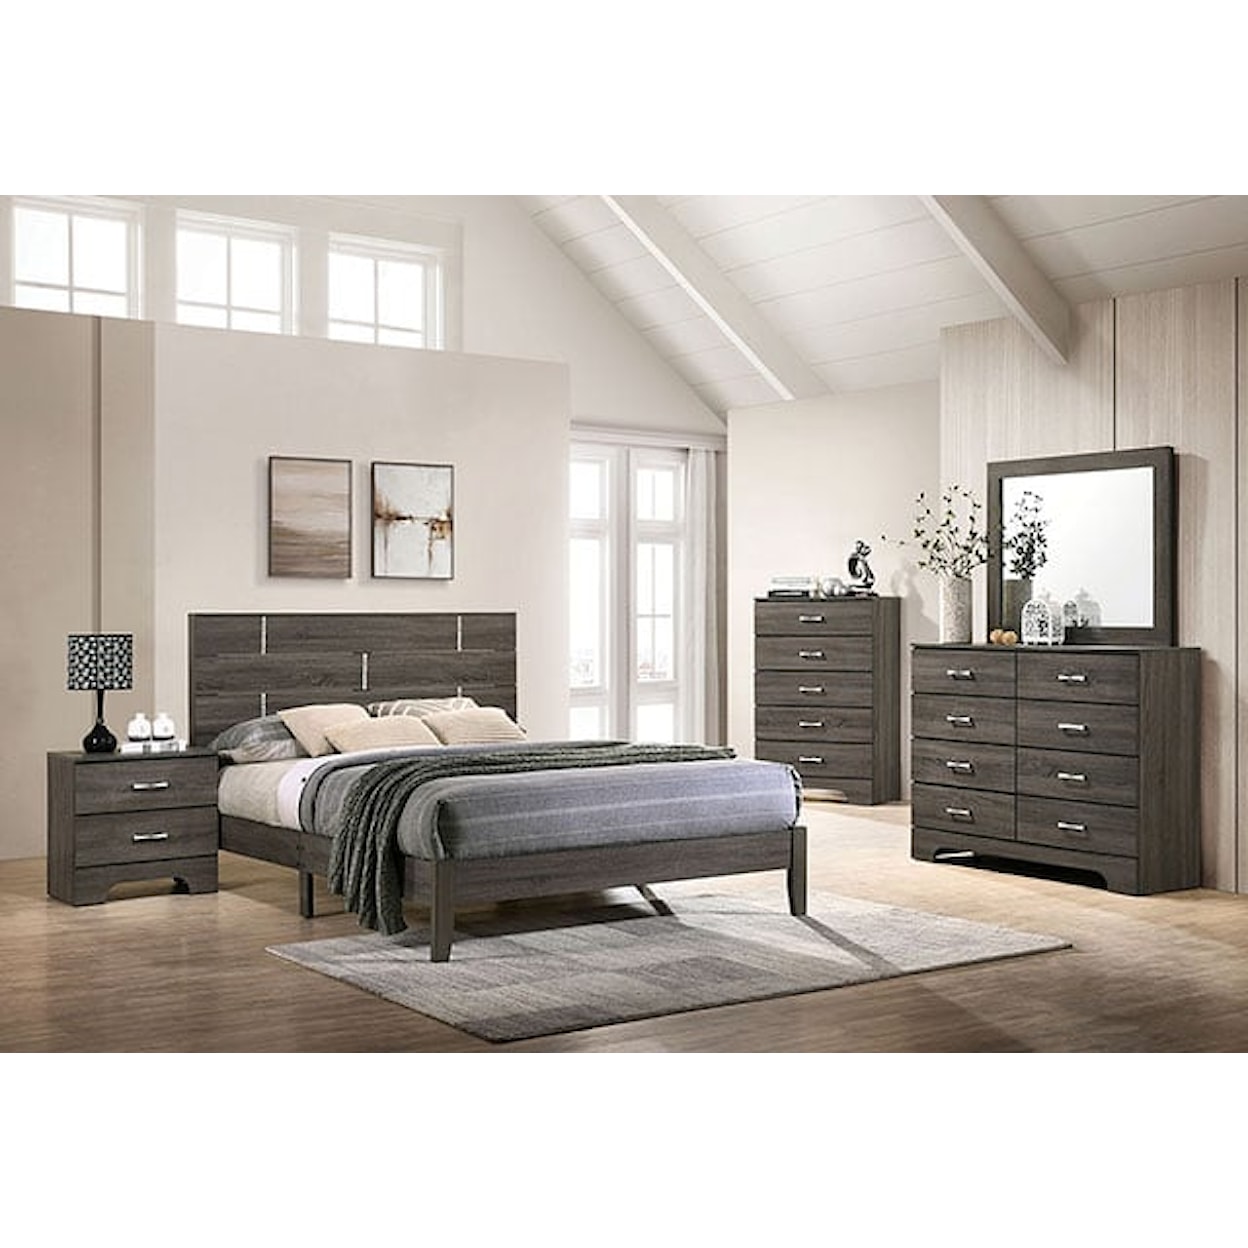 Furniture of America Richterswil 2-Drawer Nightstand